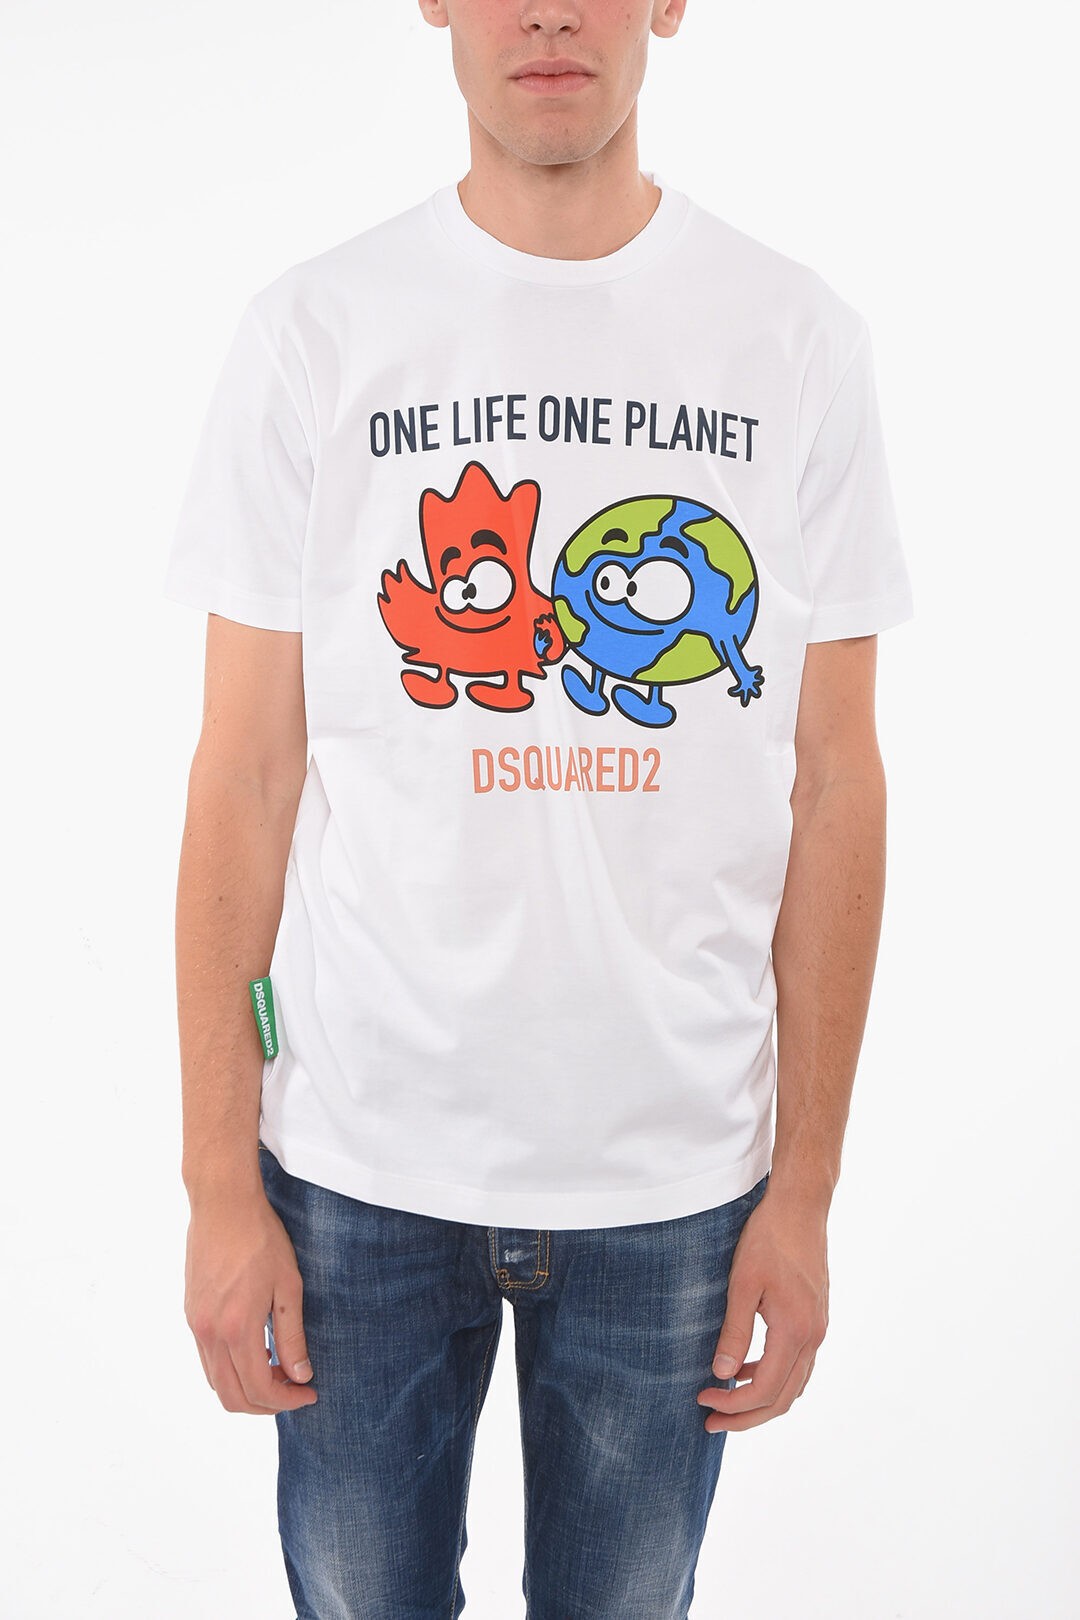 DSQUARED2 ディースクエアード トップス S78GD0066 S24427 100 メンズ ONE LIFE ONE PLANET PRINTED CREWNECK T-SHIRT 【関税・送料無料】【ラッピング無料】 dk